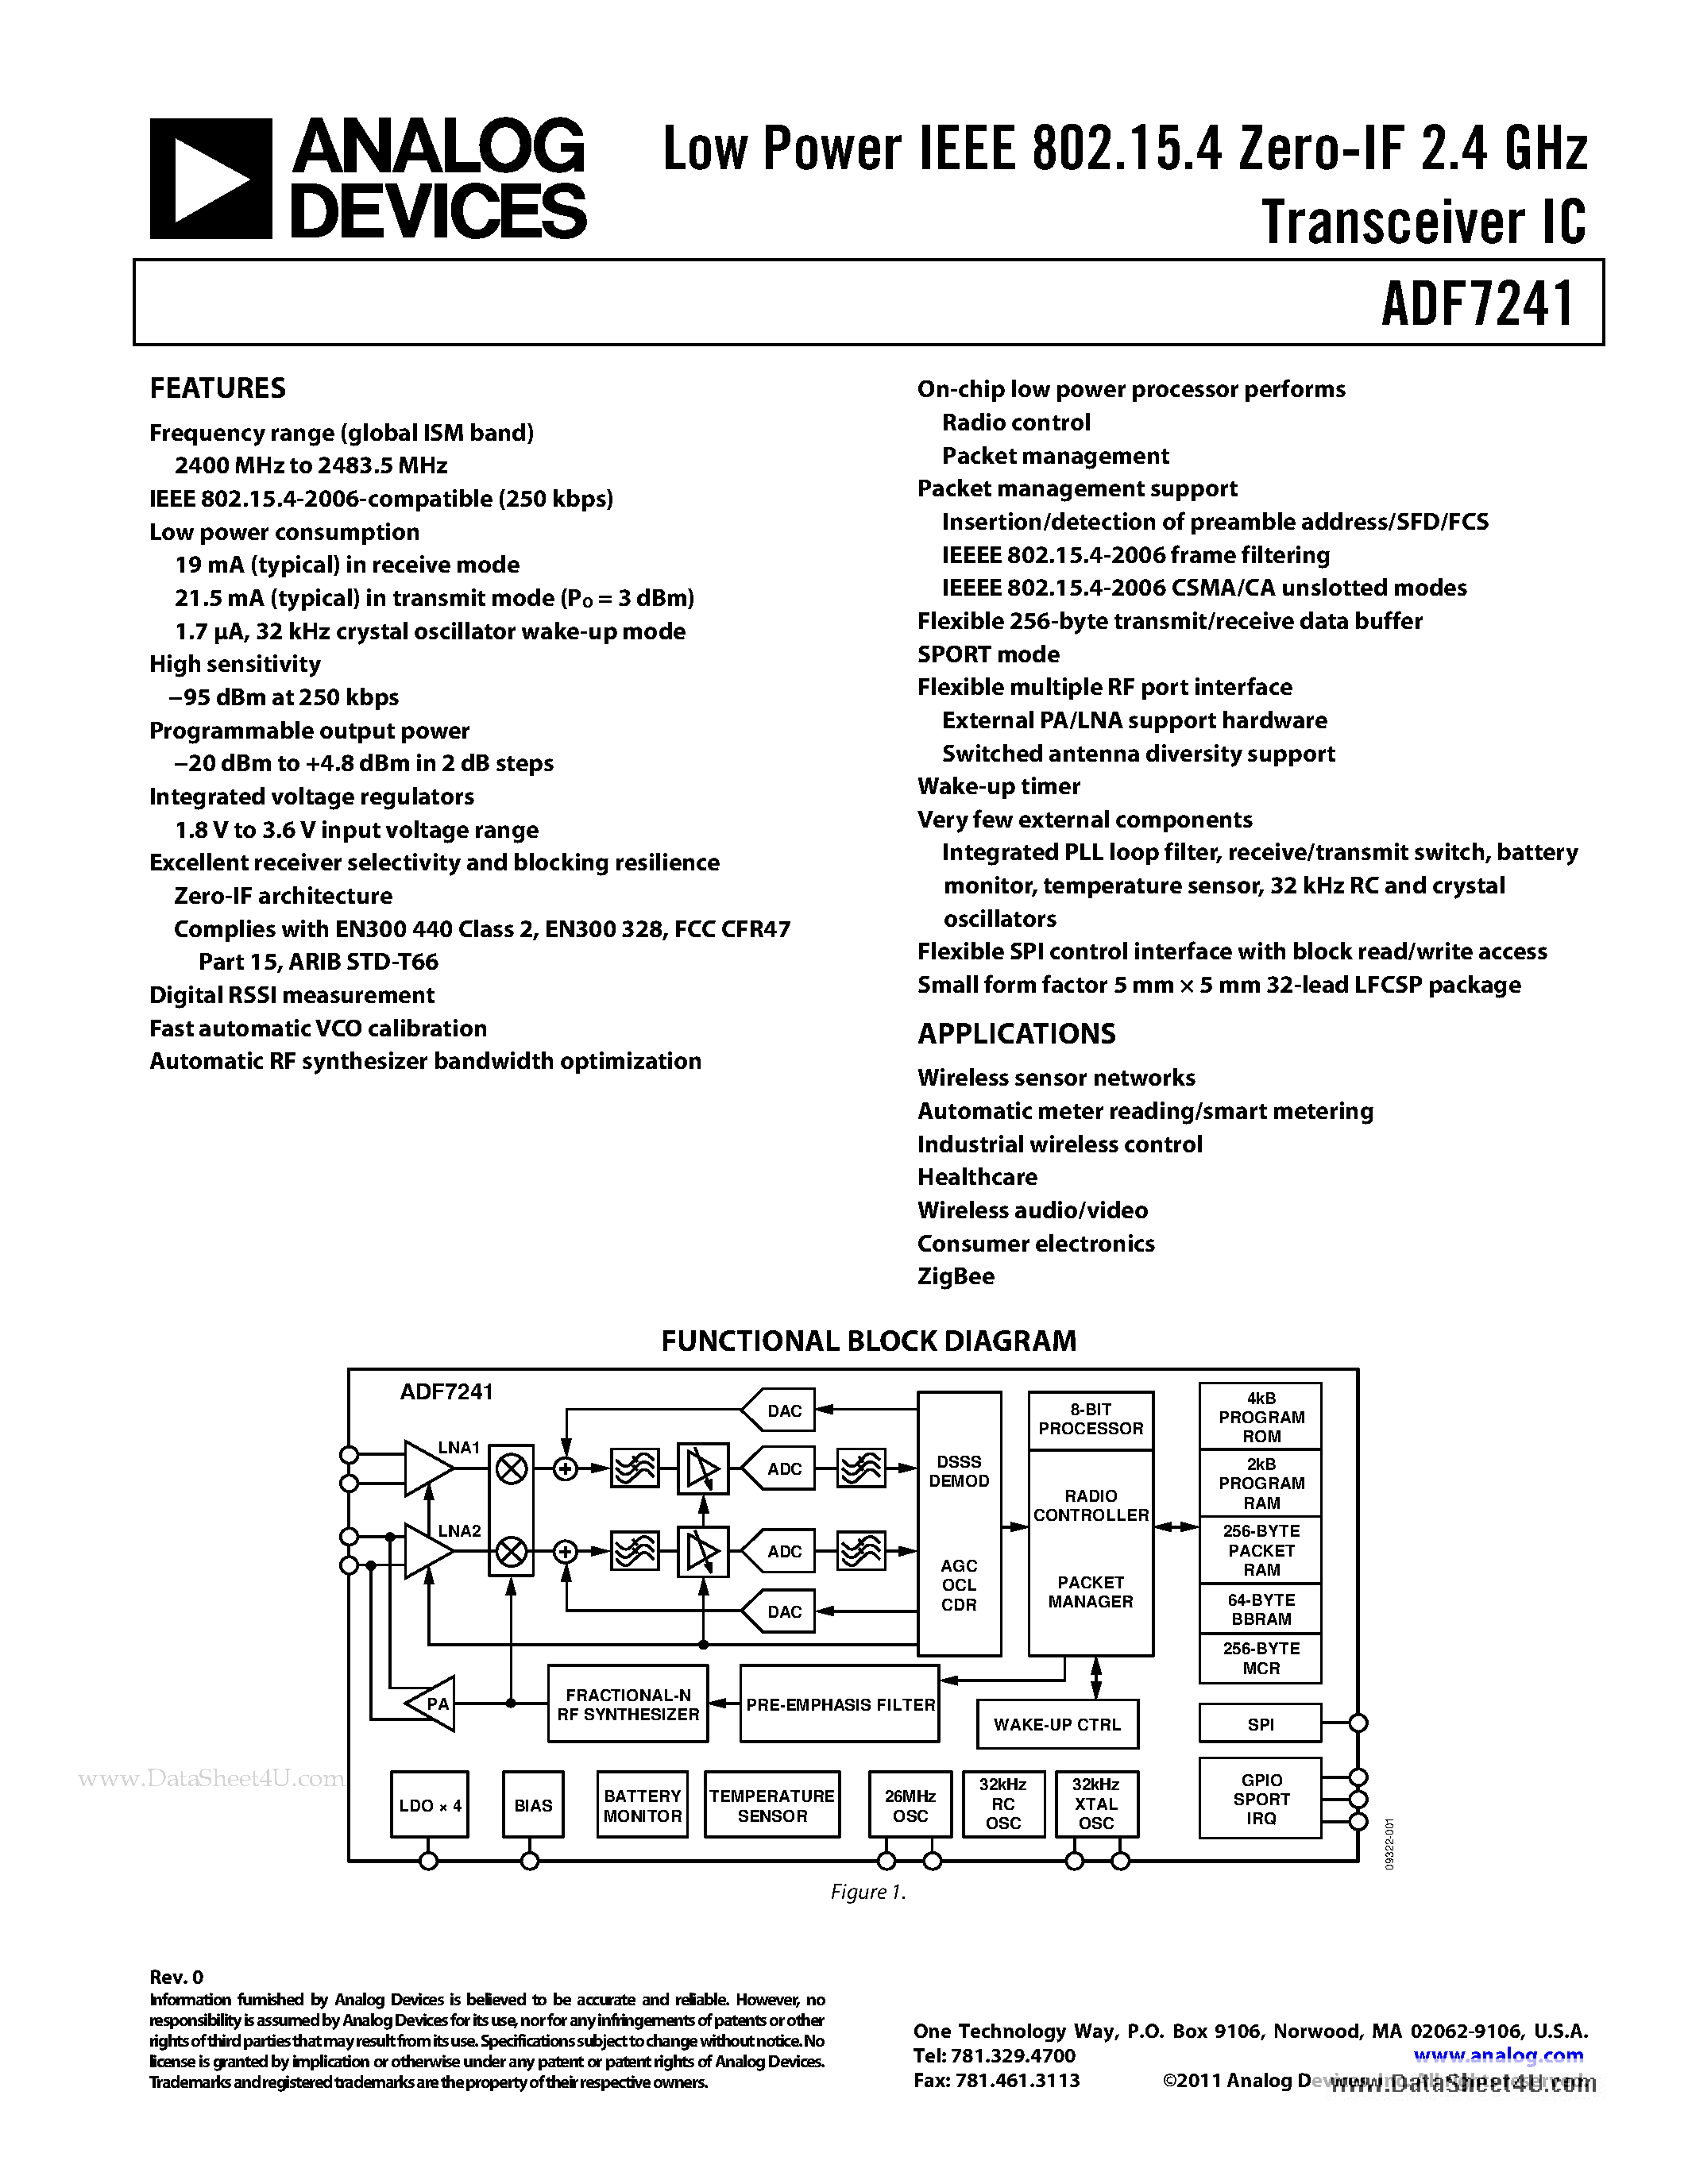 Datasheet ADF7241 - Low Power IEEE 802.15.4 Zero-IF 2.4 GHz Transceiver IC page 1